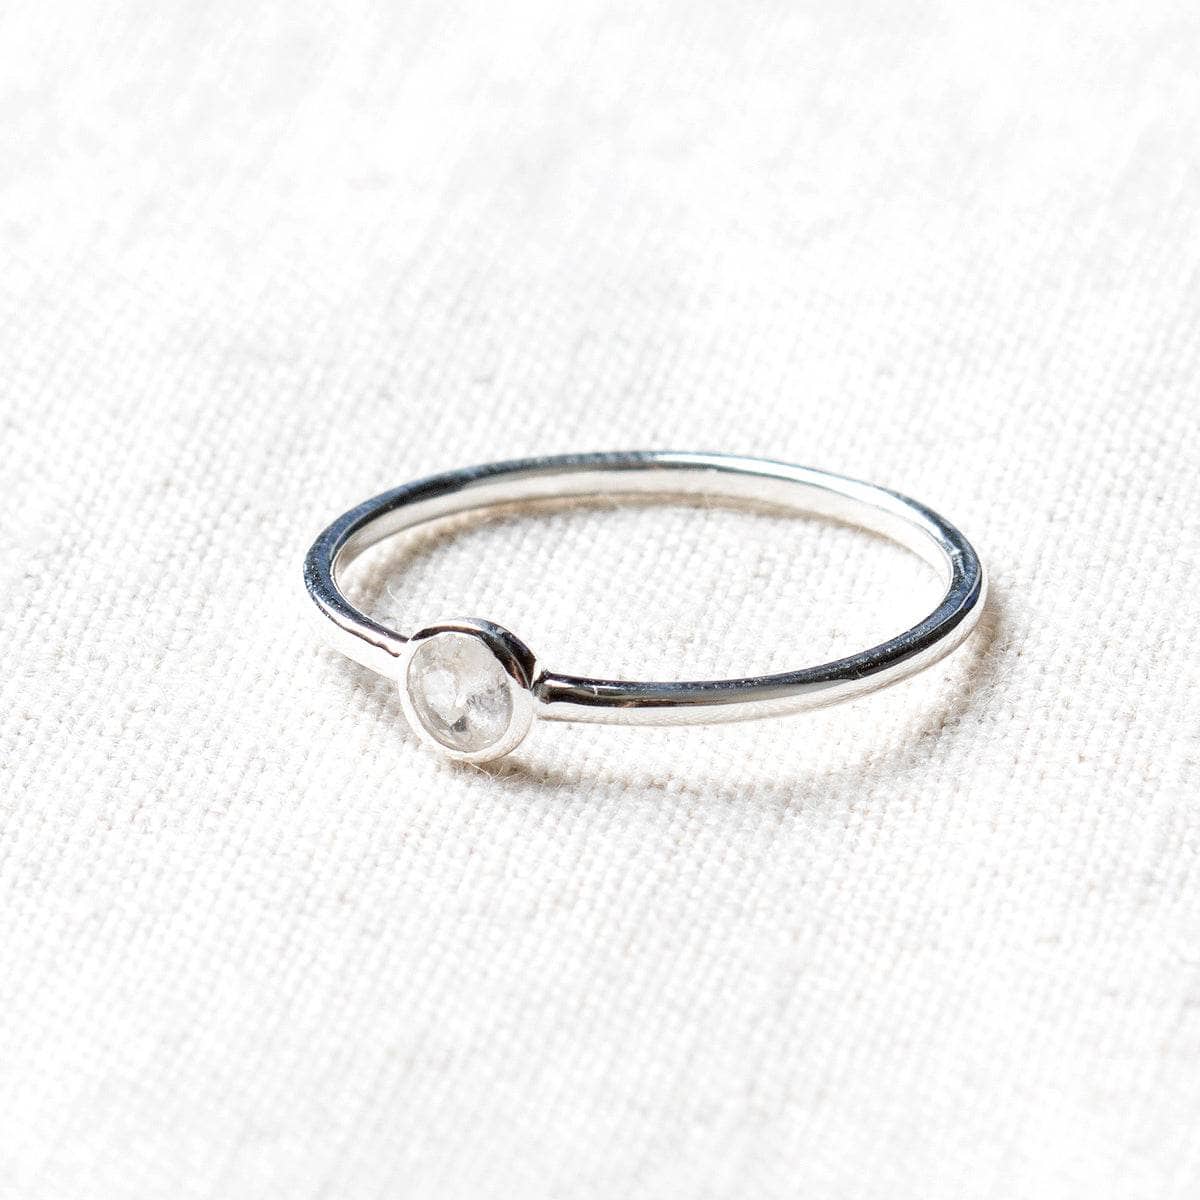 Herkimer Diamond Silver or Gold Ring by Tiny Rituals